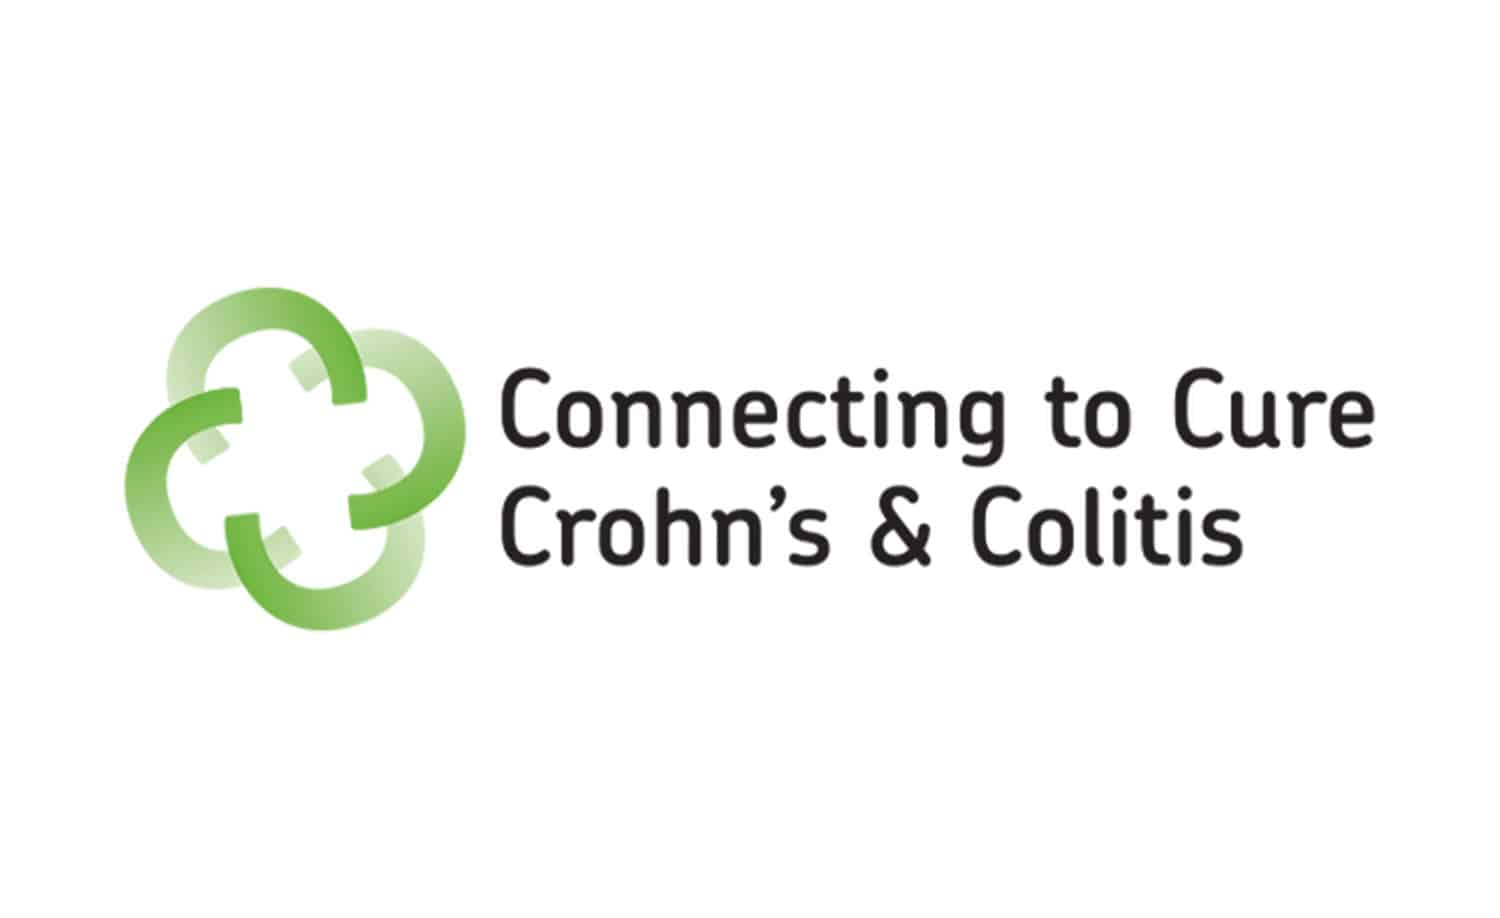 Connecting to Cure Crohn's & Colitis